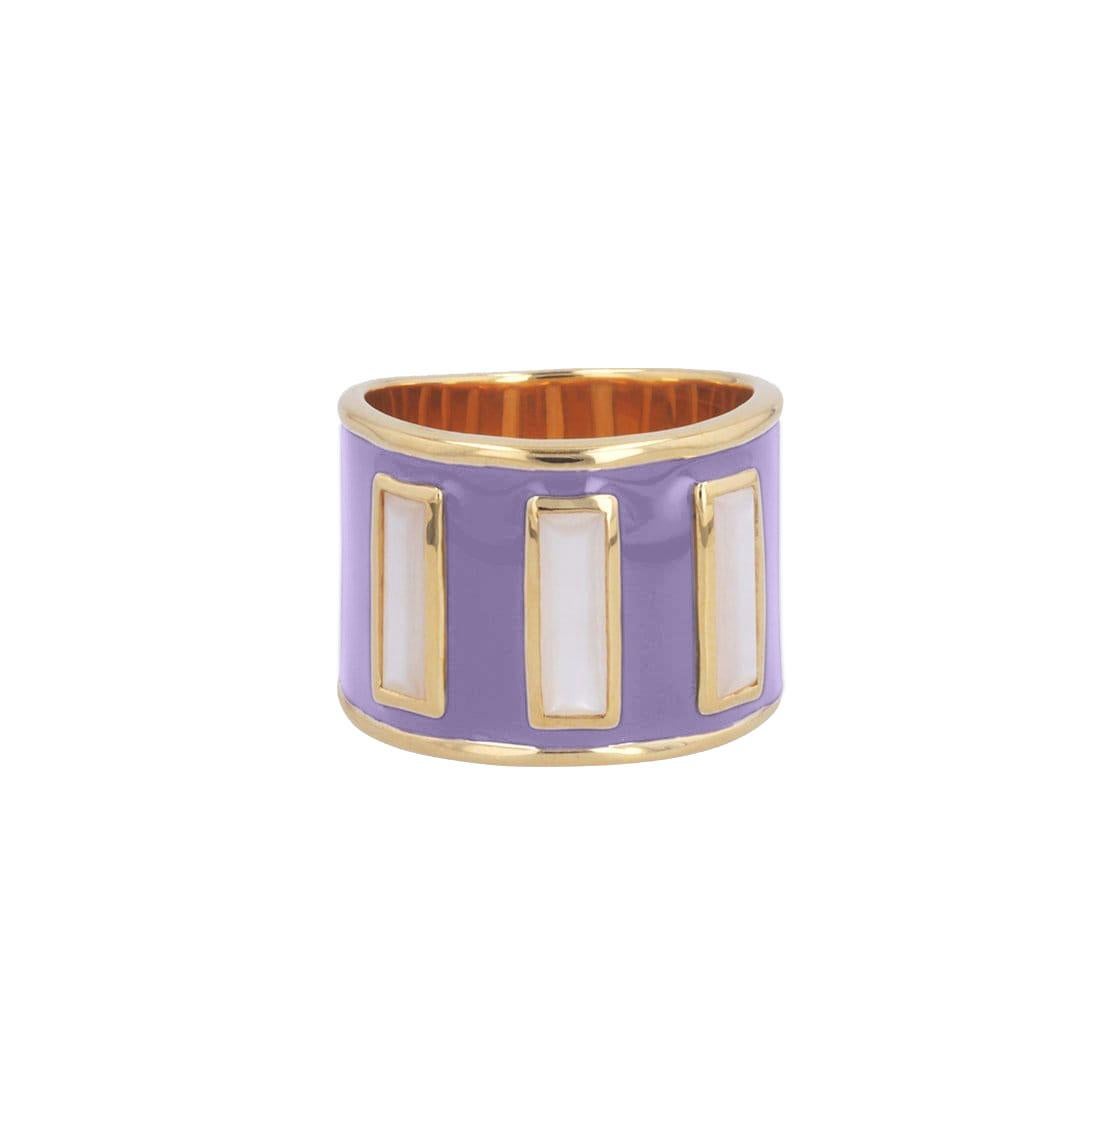 Baguette Cut Limited Edition Gigi Enamel Ring in New Colors with Mother of Pearl For Sale